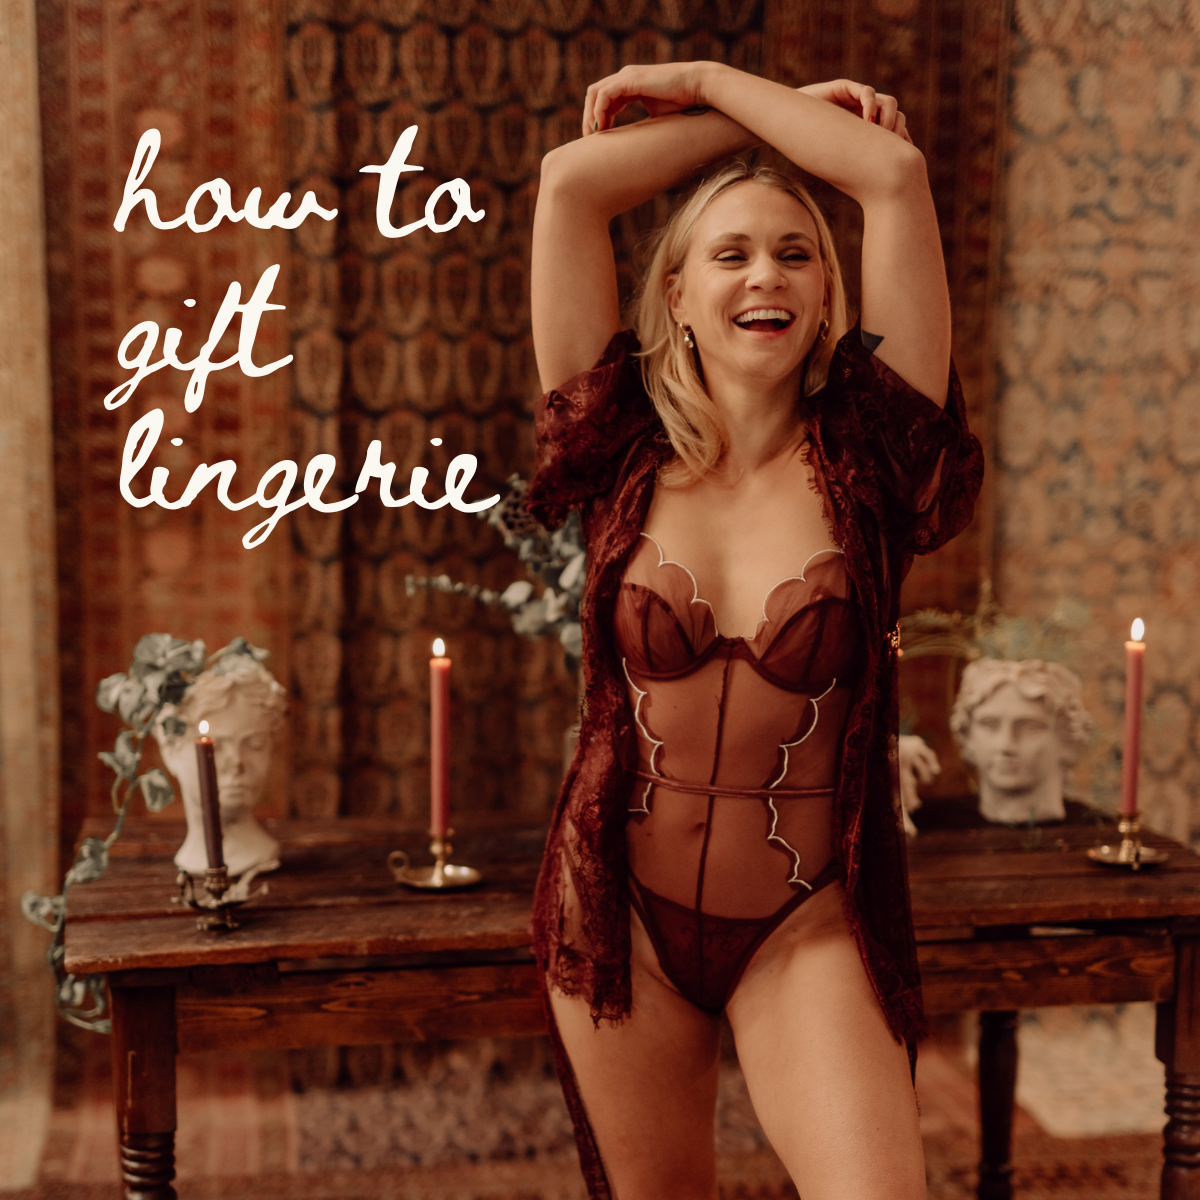 How to Gift Lingerie: Guide to finding lingerie your partner will love